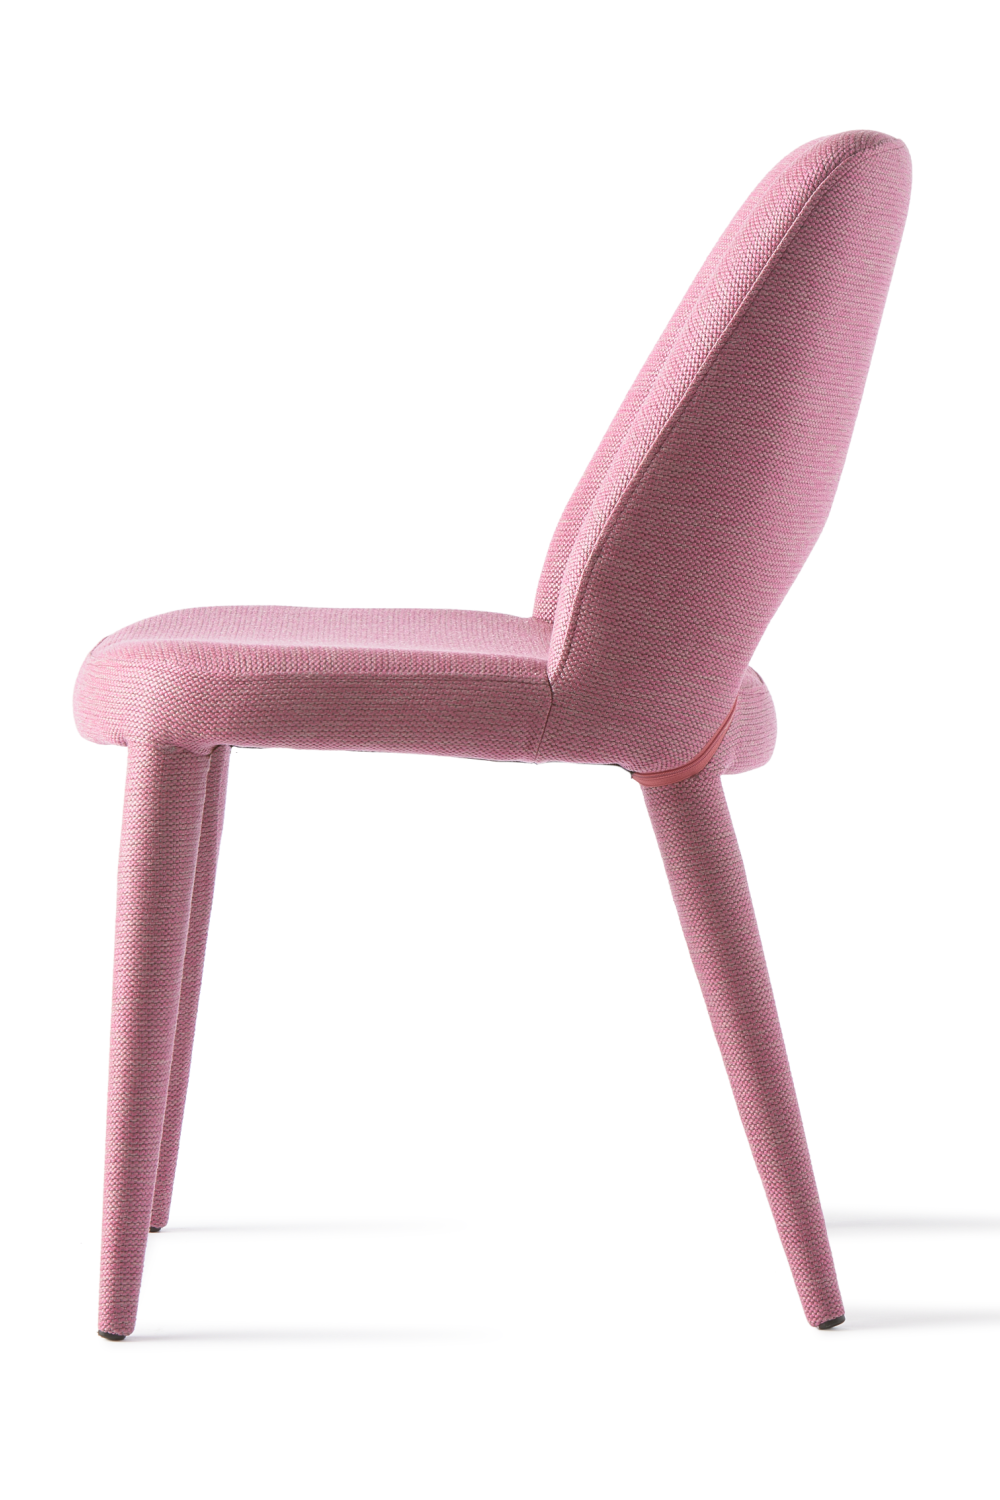 Cut-Out Back Fabric Dining Chair | Pols Potten Holy | Oroa.com